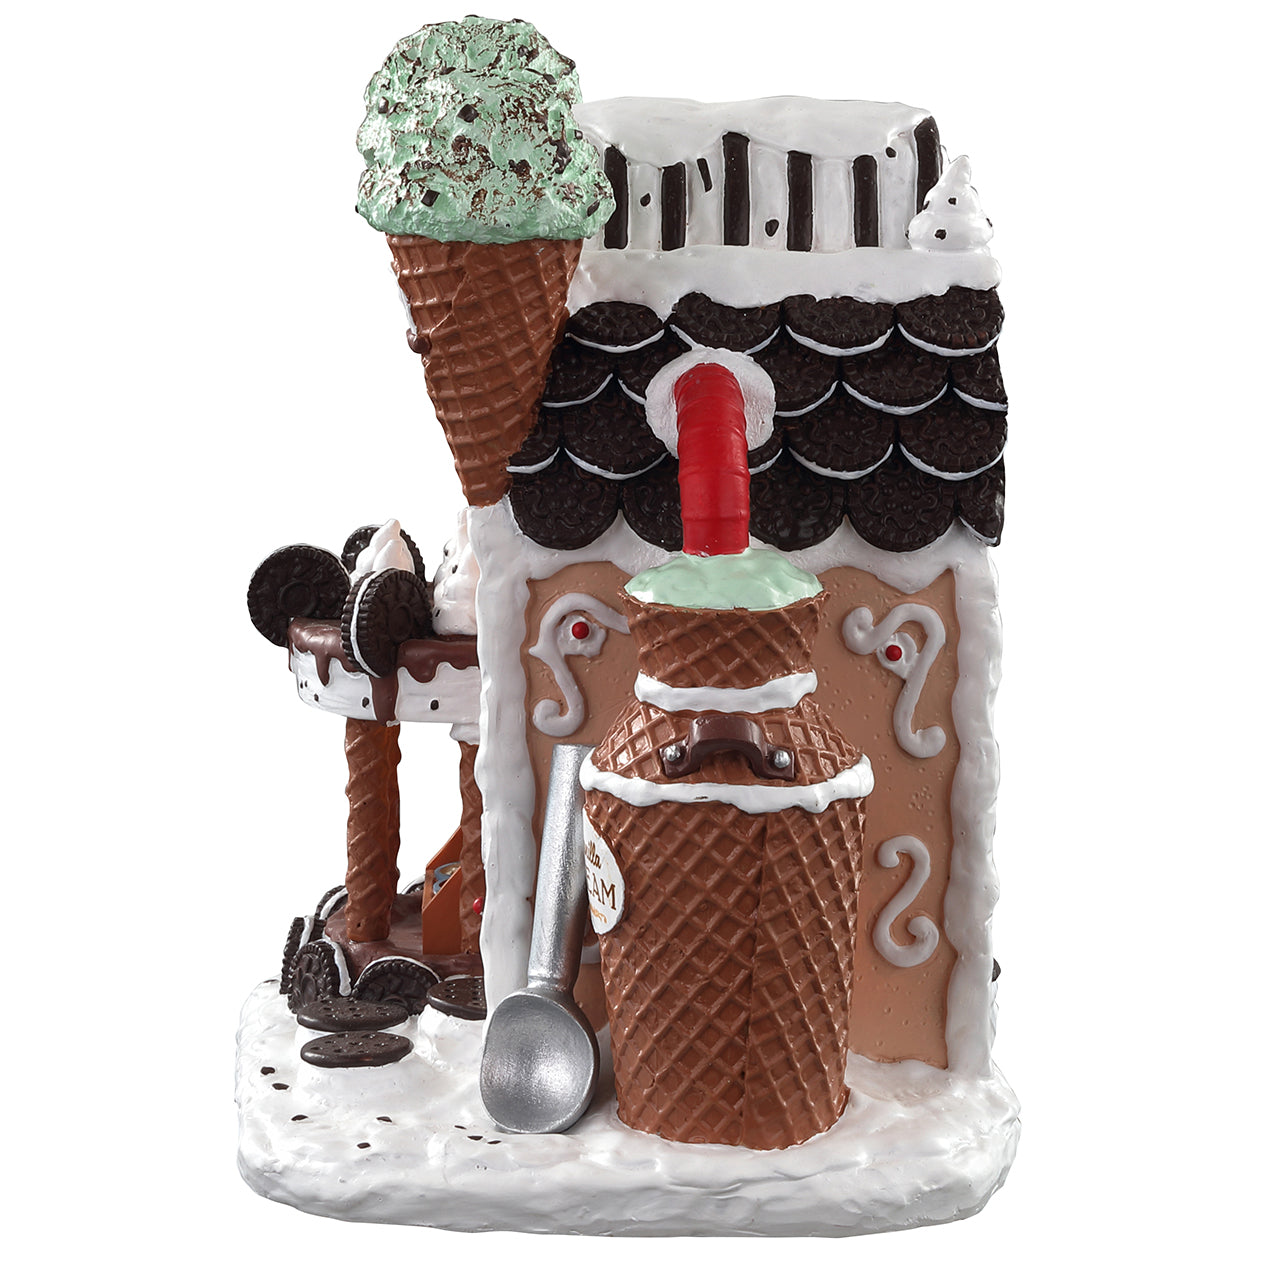 Lemax 05699 Cookie'N Cream Creamery, Standard Lighted Building- Gift Spice